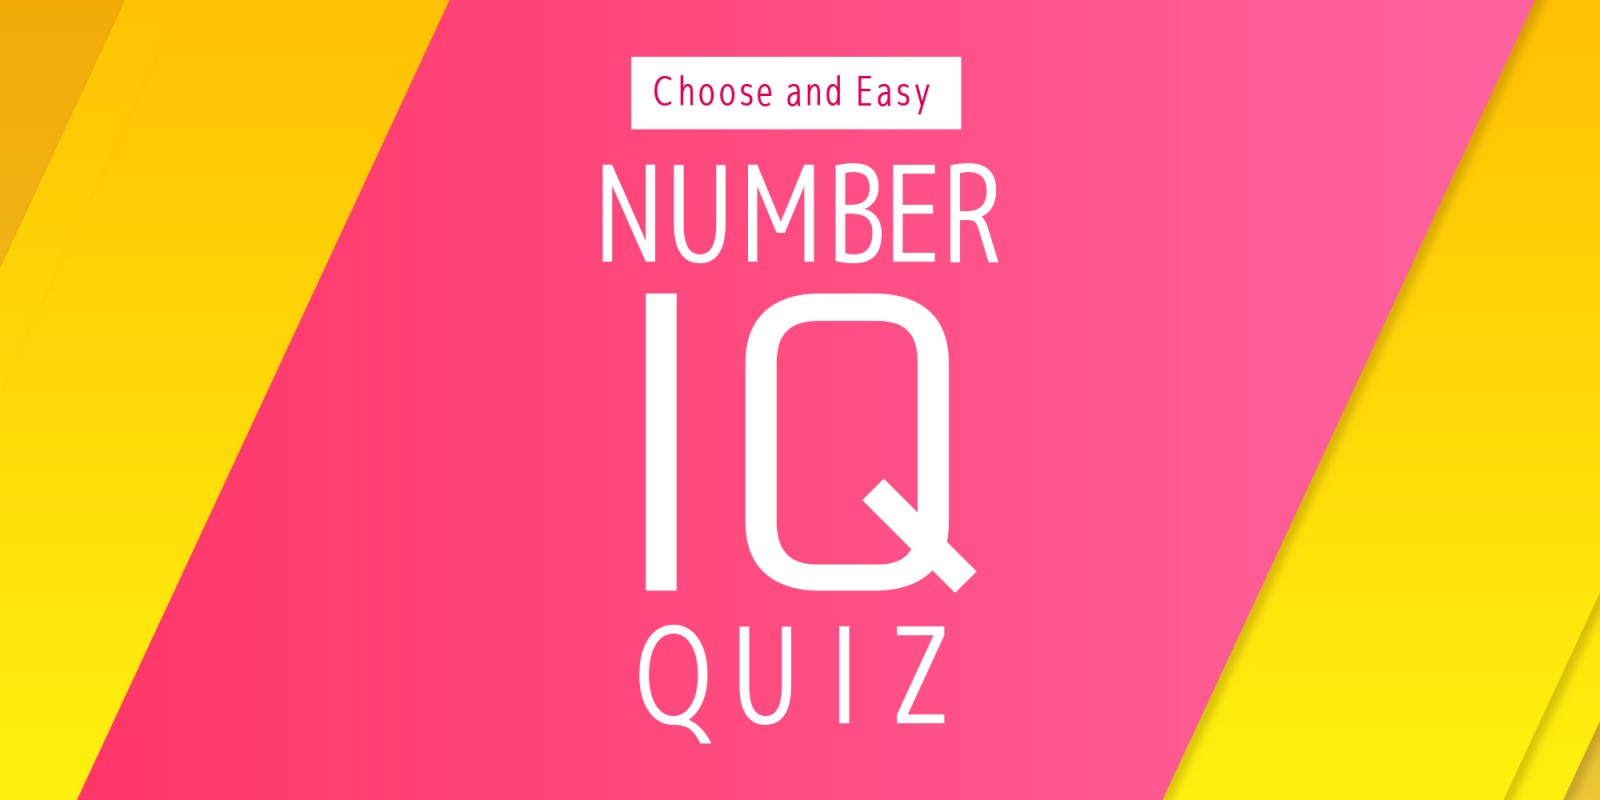 Choose and Easy NUMBER IQ QUIZ